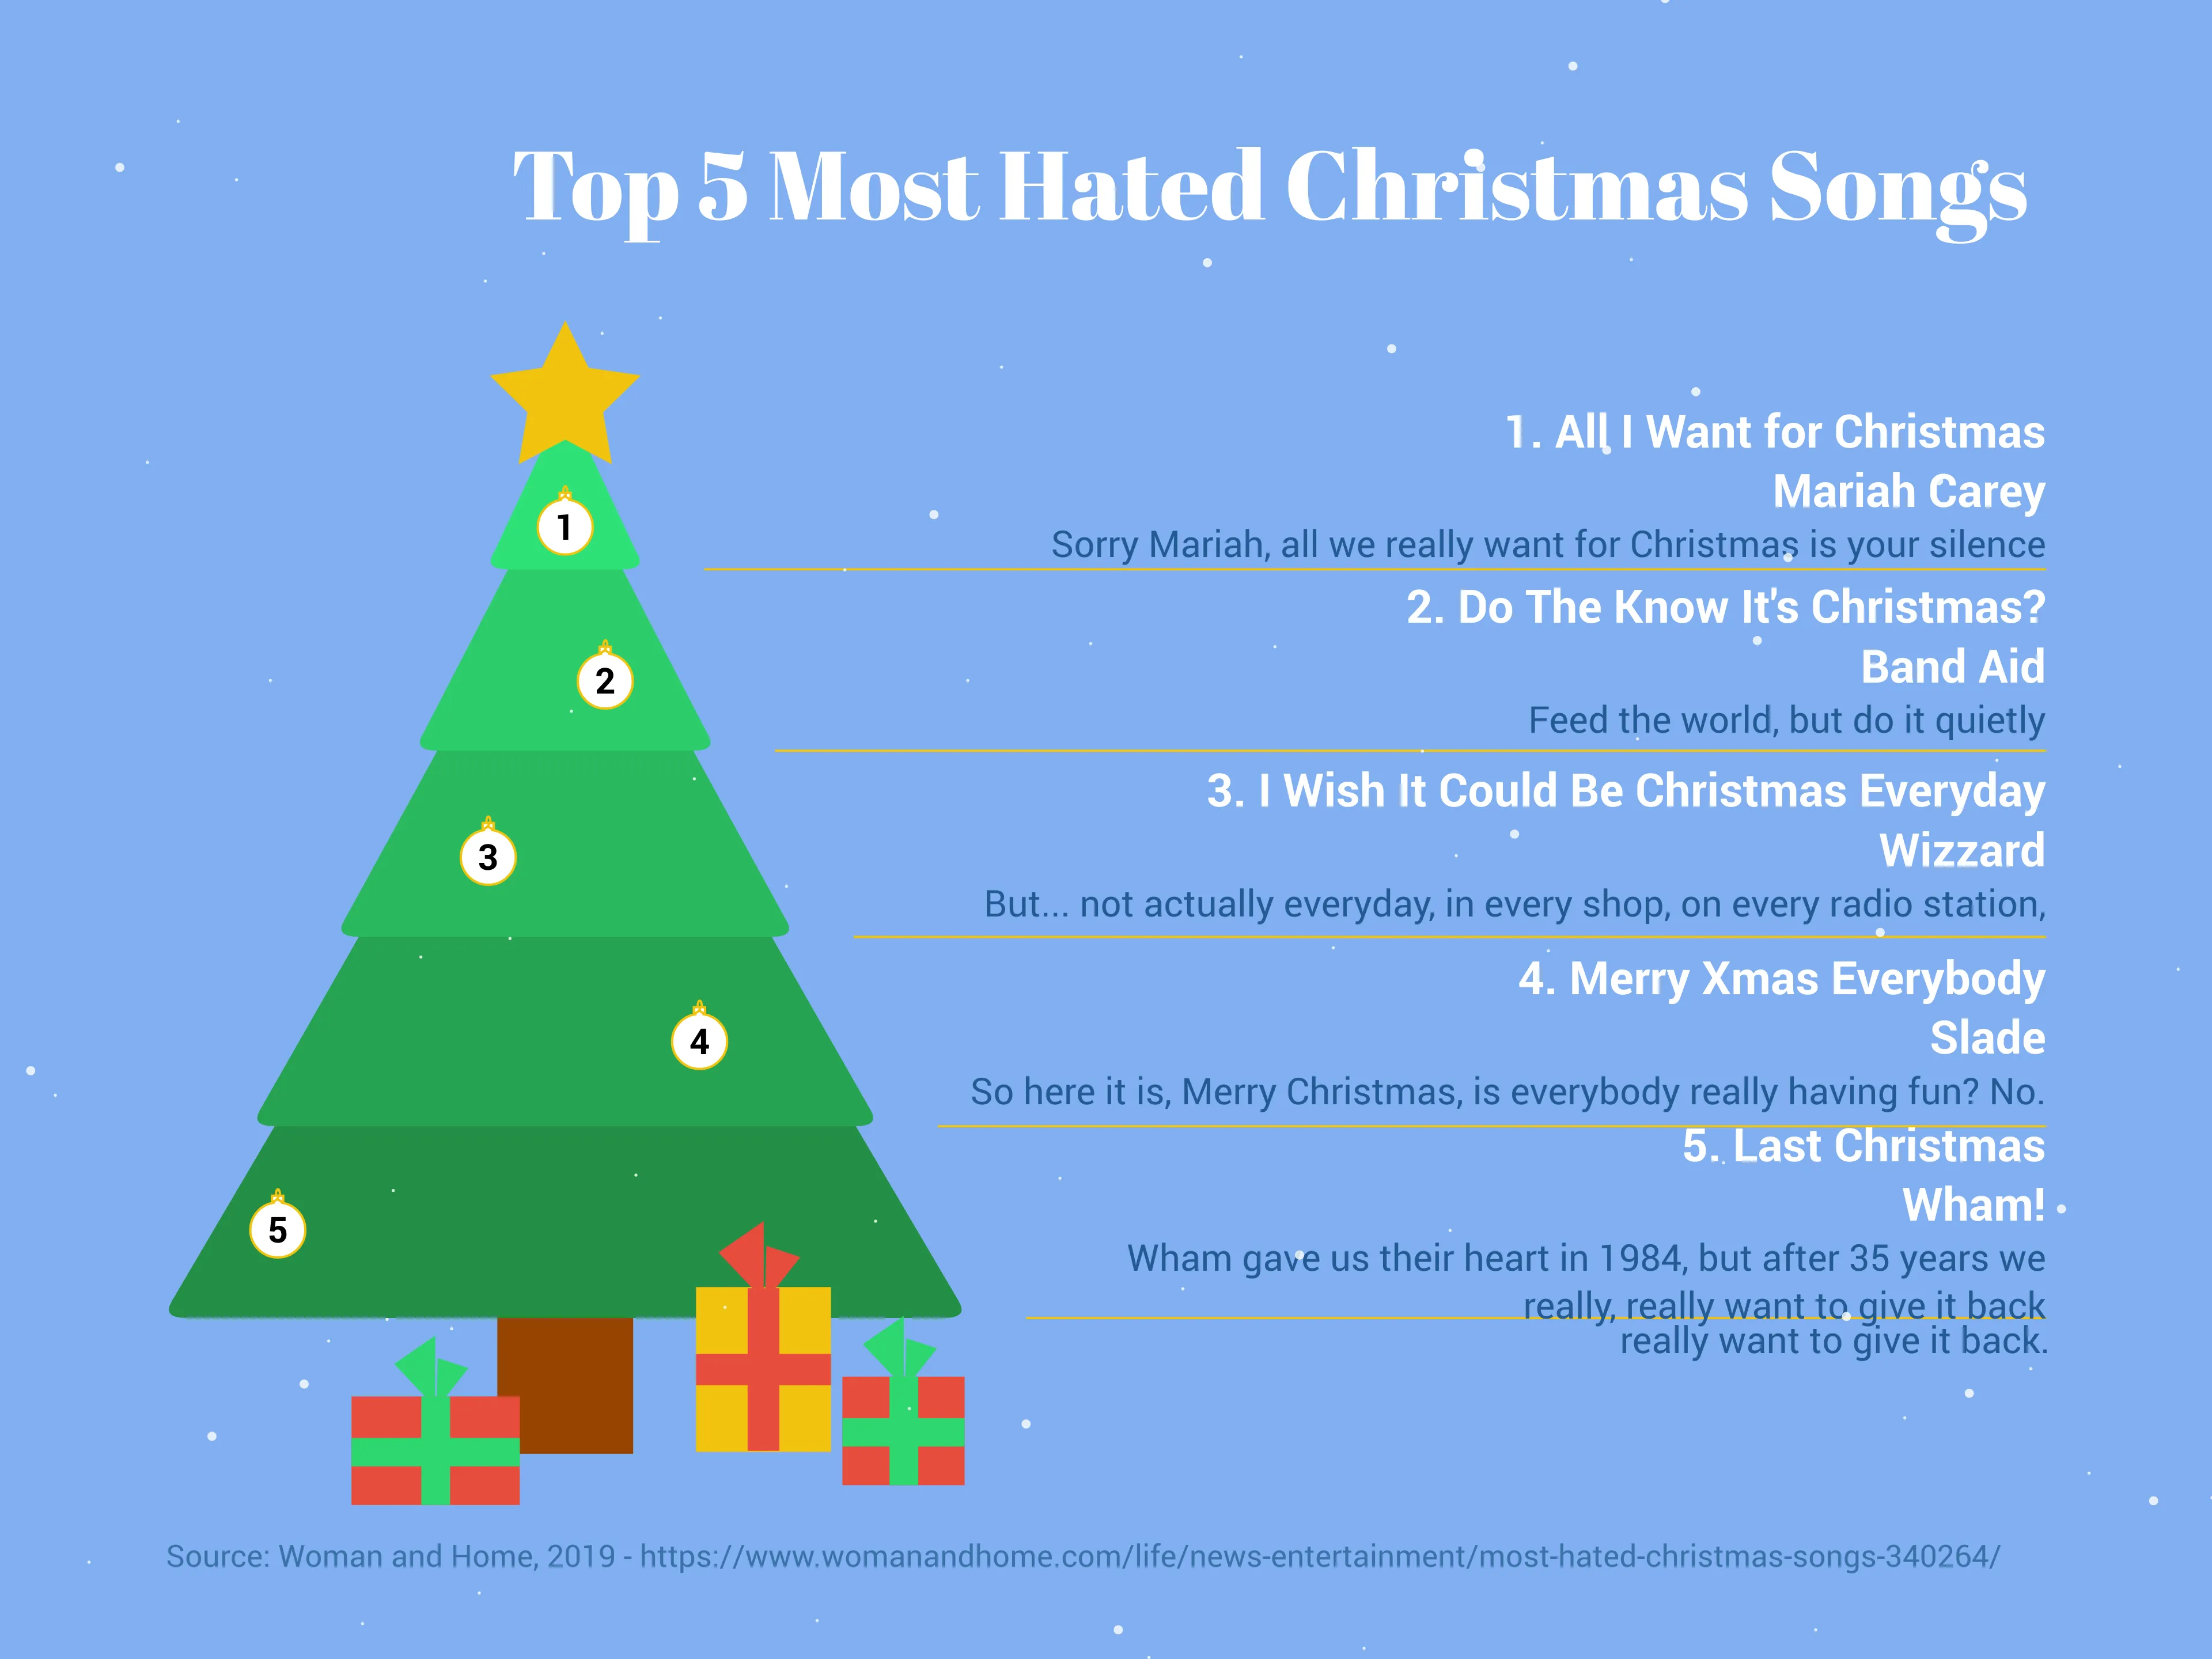 Top 5 Most Hated Christmas Songs